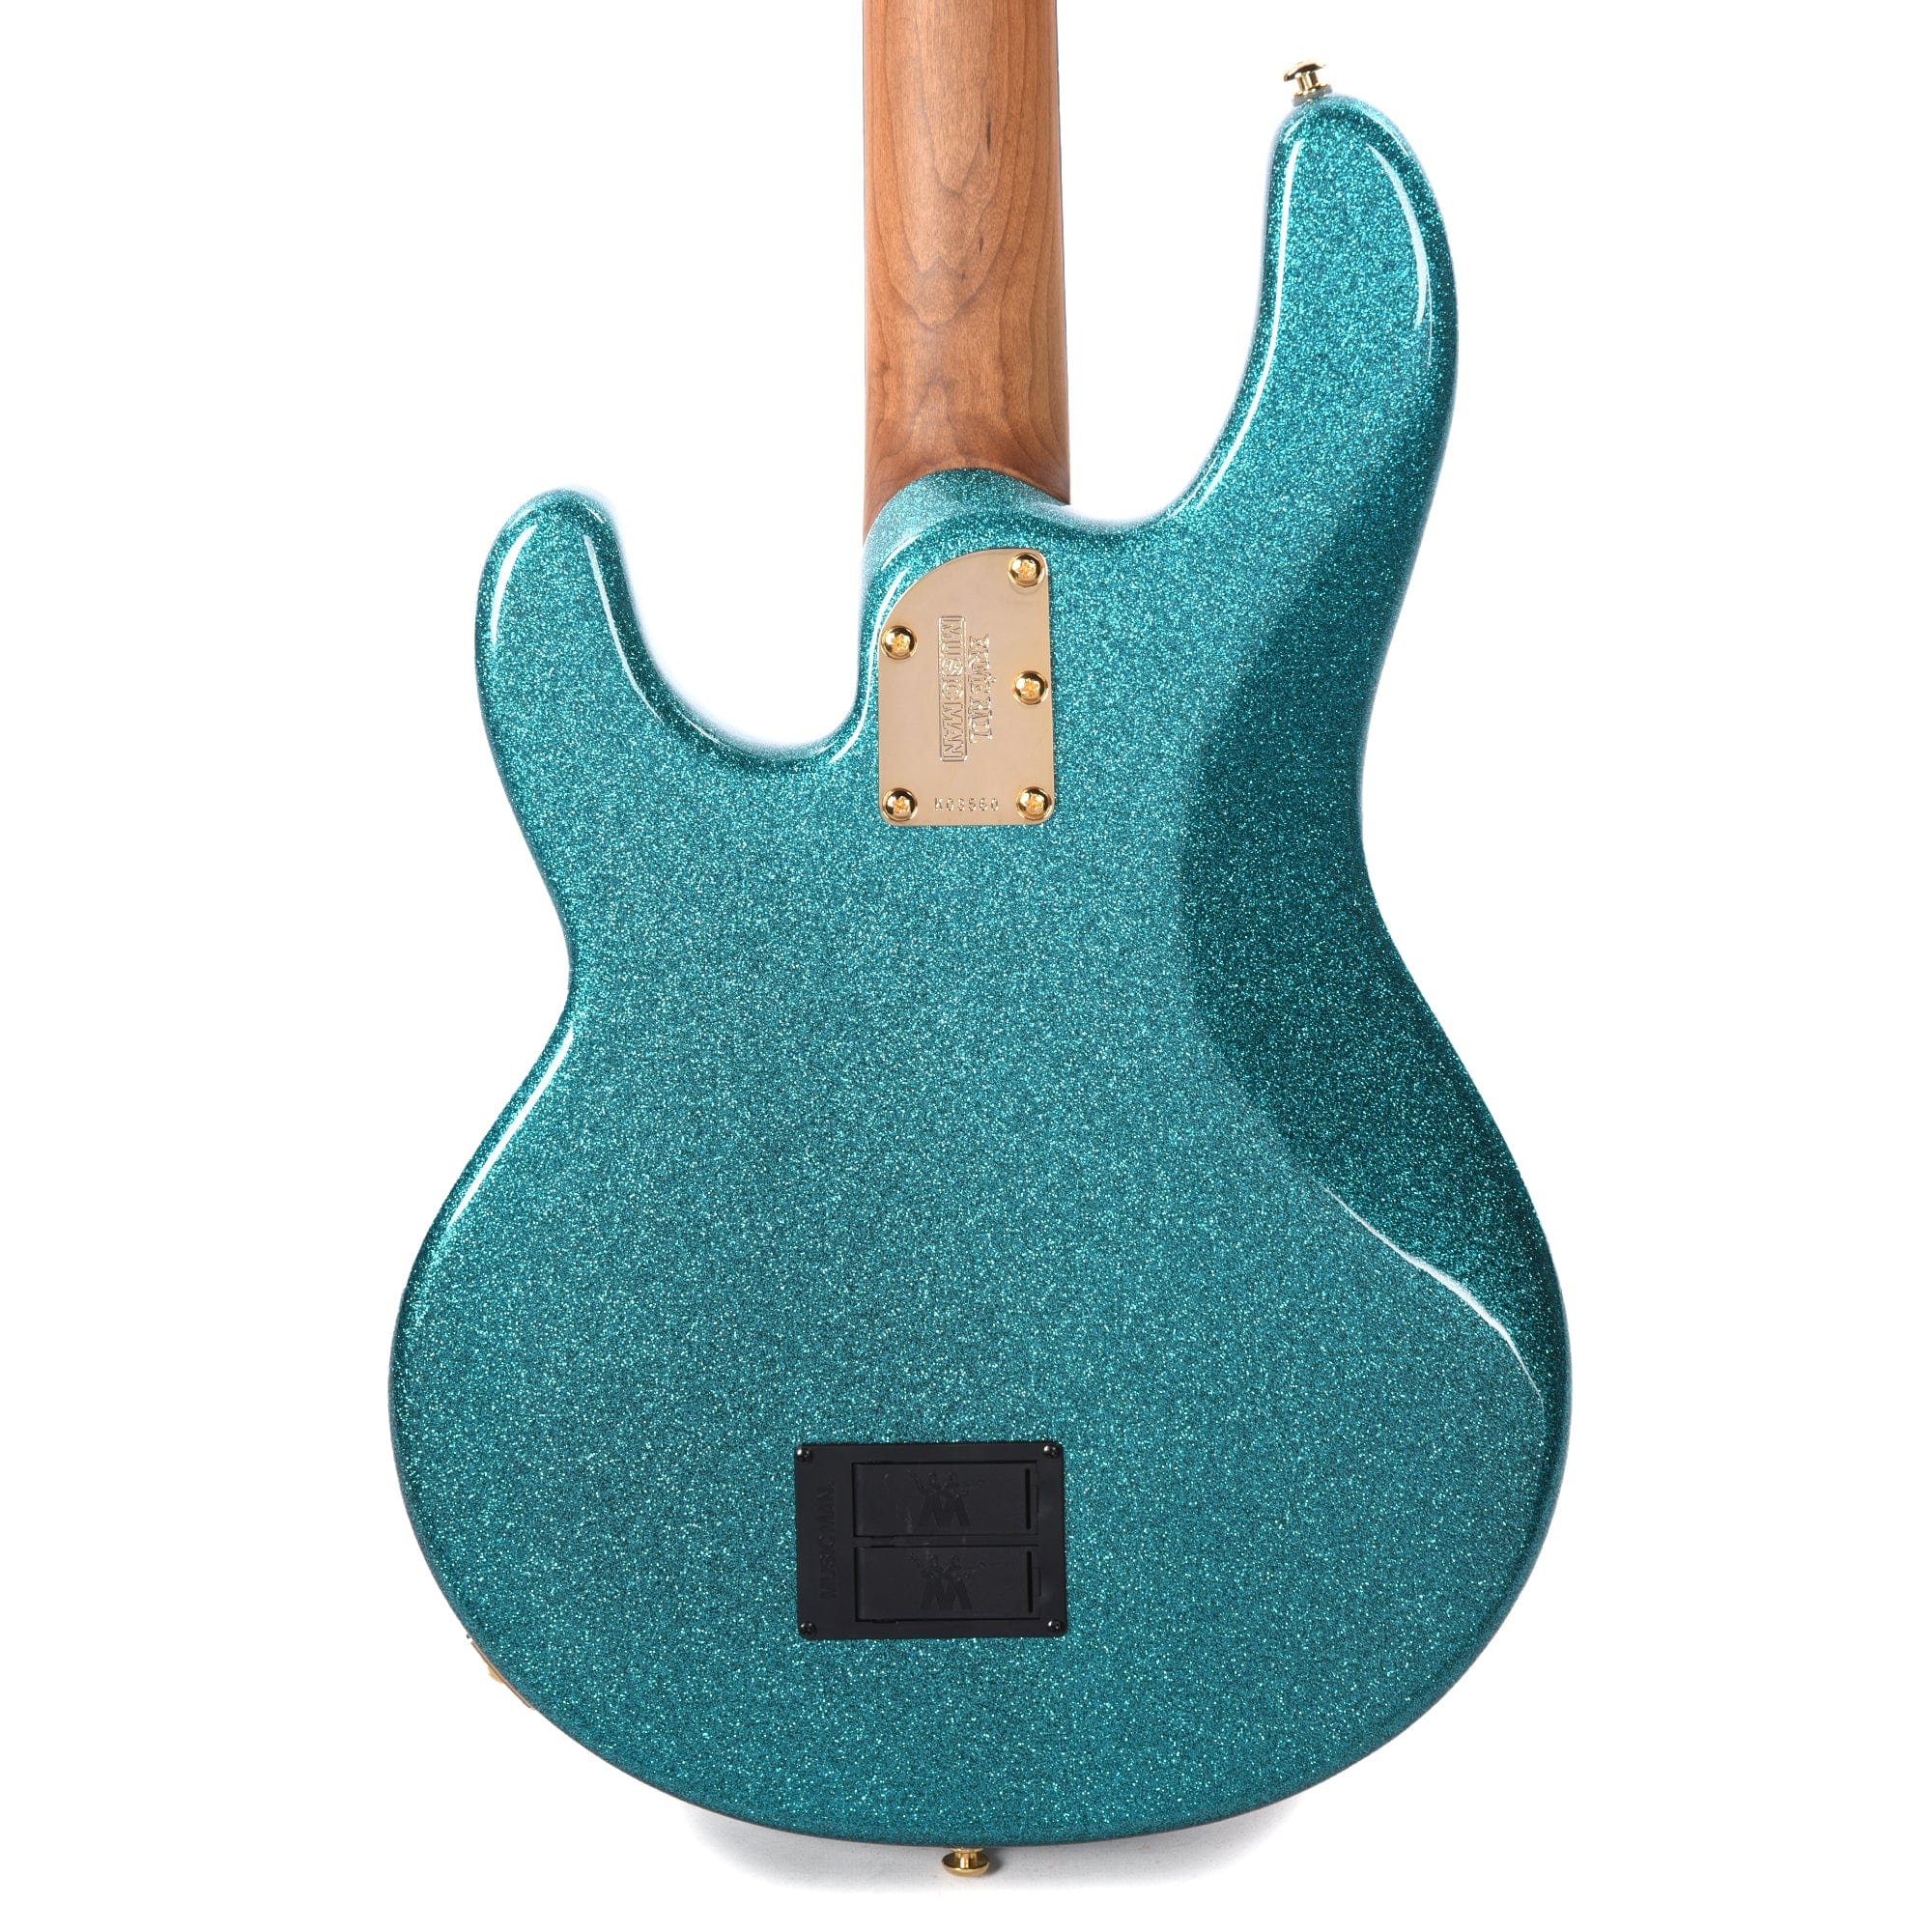 Music Man StingRay Special Ocean Sparkle w/Roasted Maple Neck